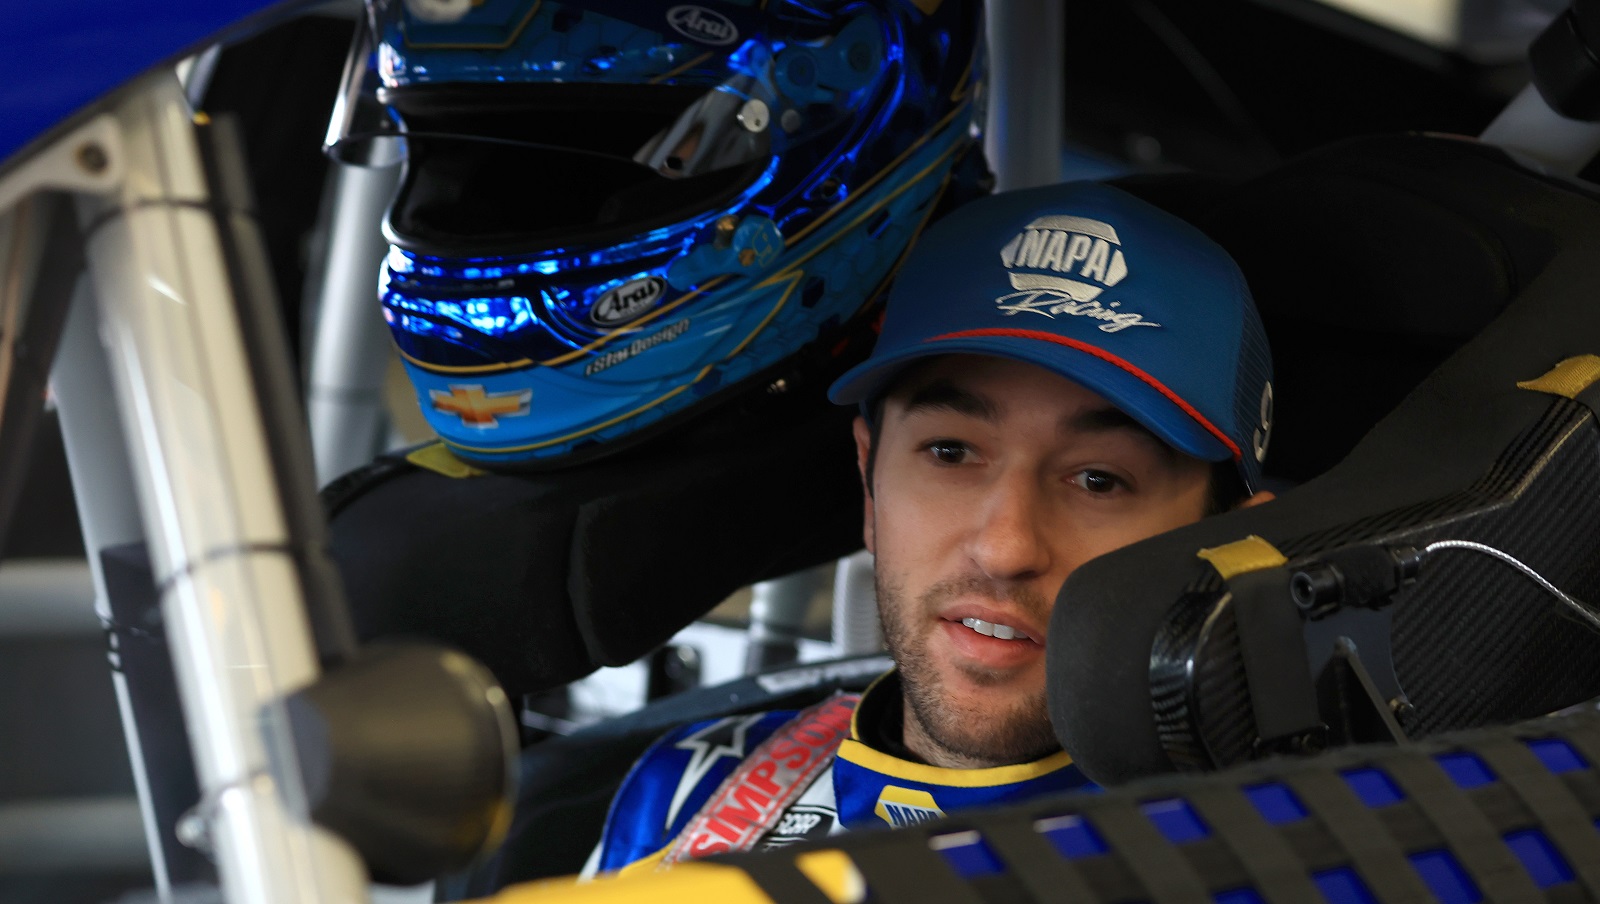 Chase Elliott sits in the No. 9 Chevy during practice for NASCAR's Daytona 500 on Feb. 19, 2022. | Mike Ehrmann/Getty Images